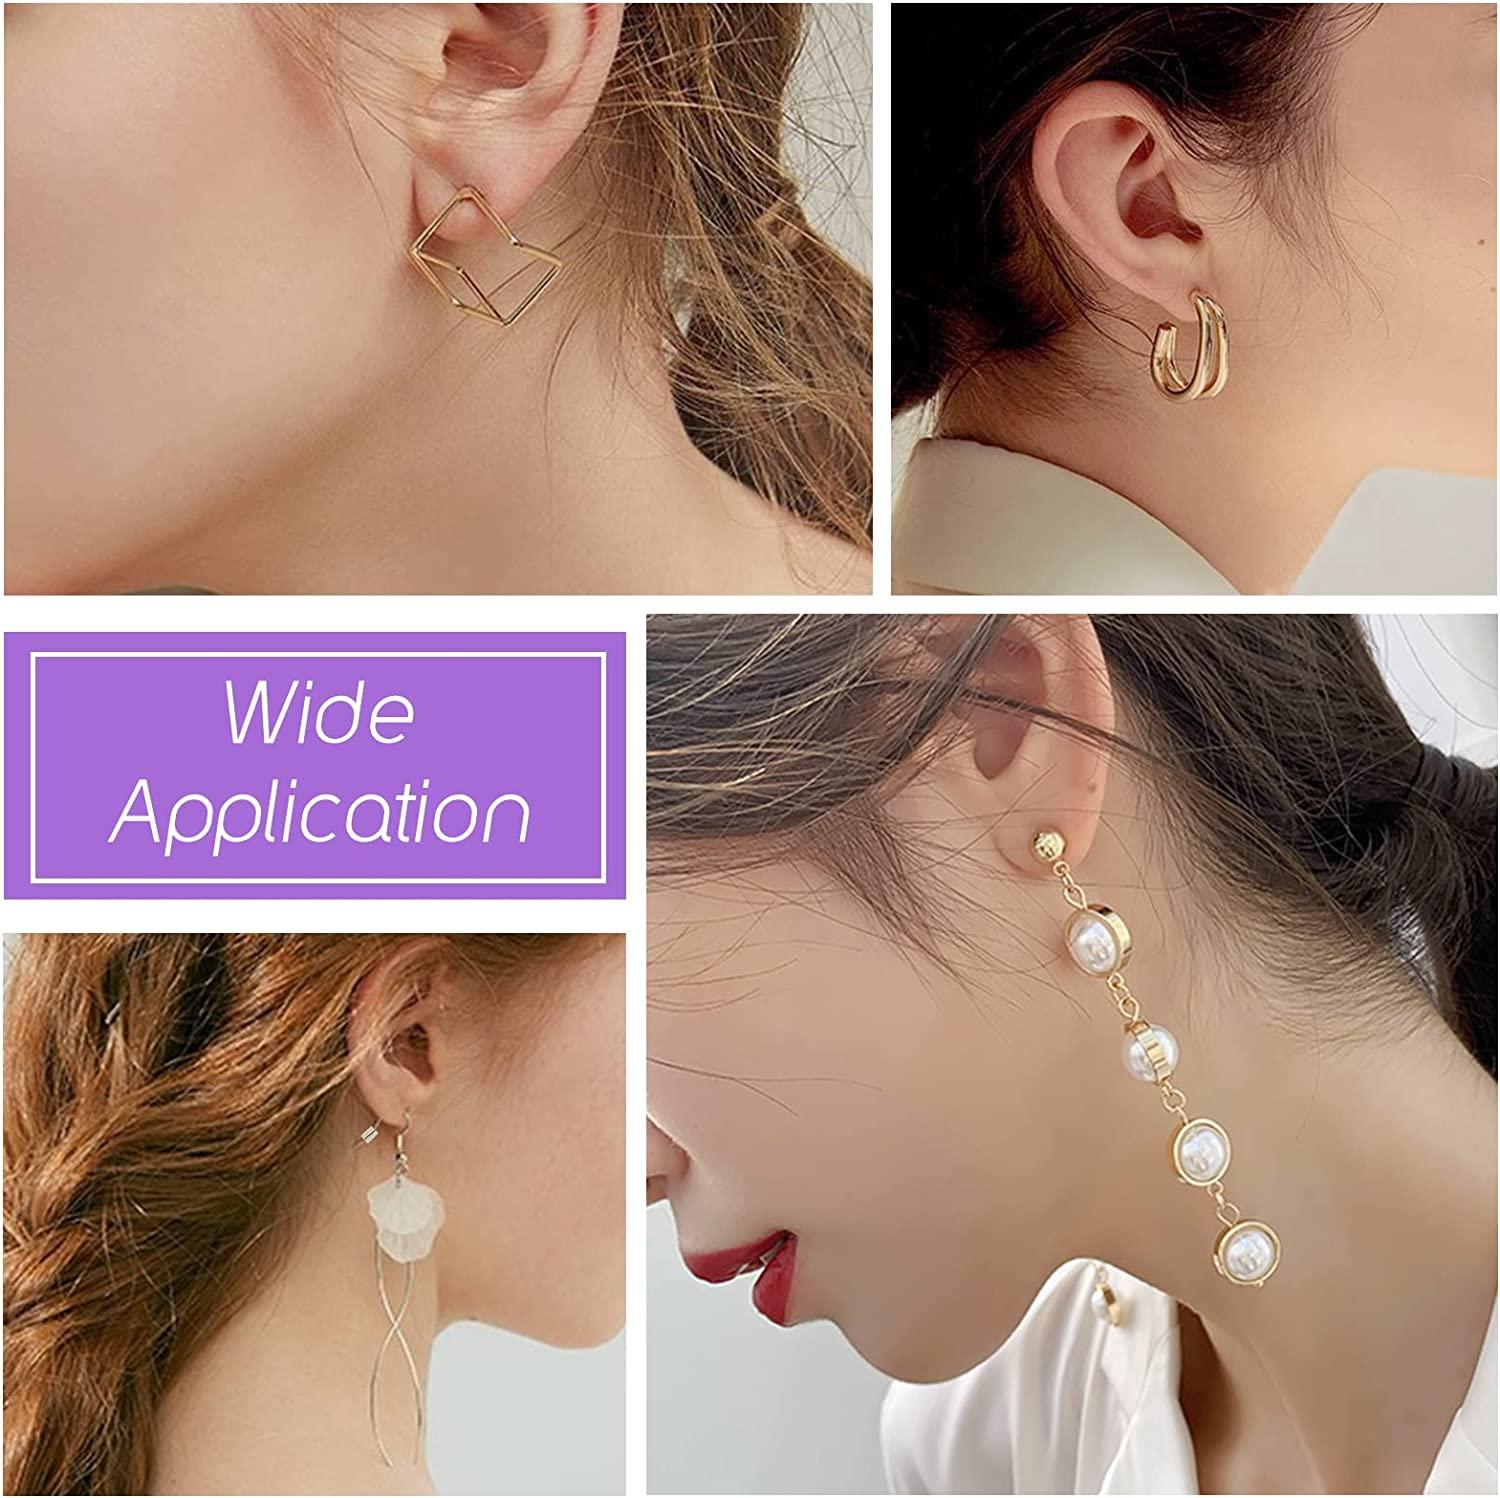 Soft Silicone Earring Backs Rubber Earring Safety Back Stopper